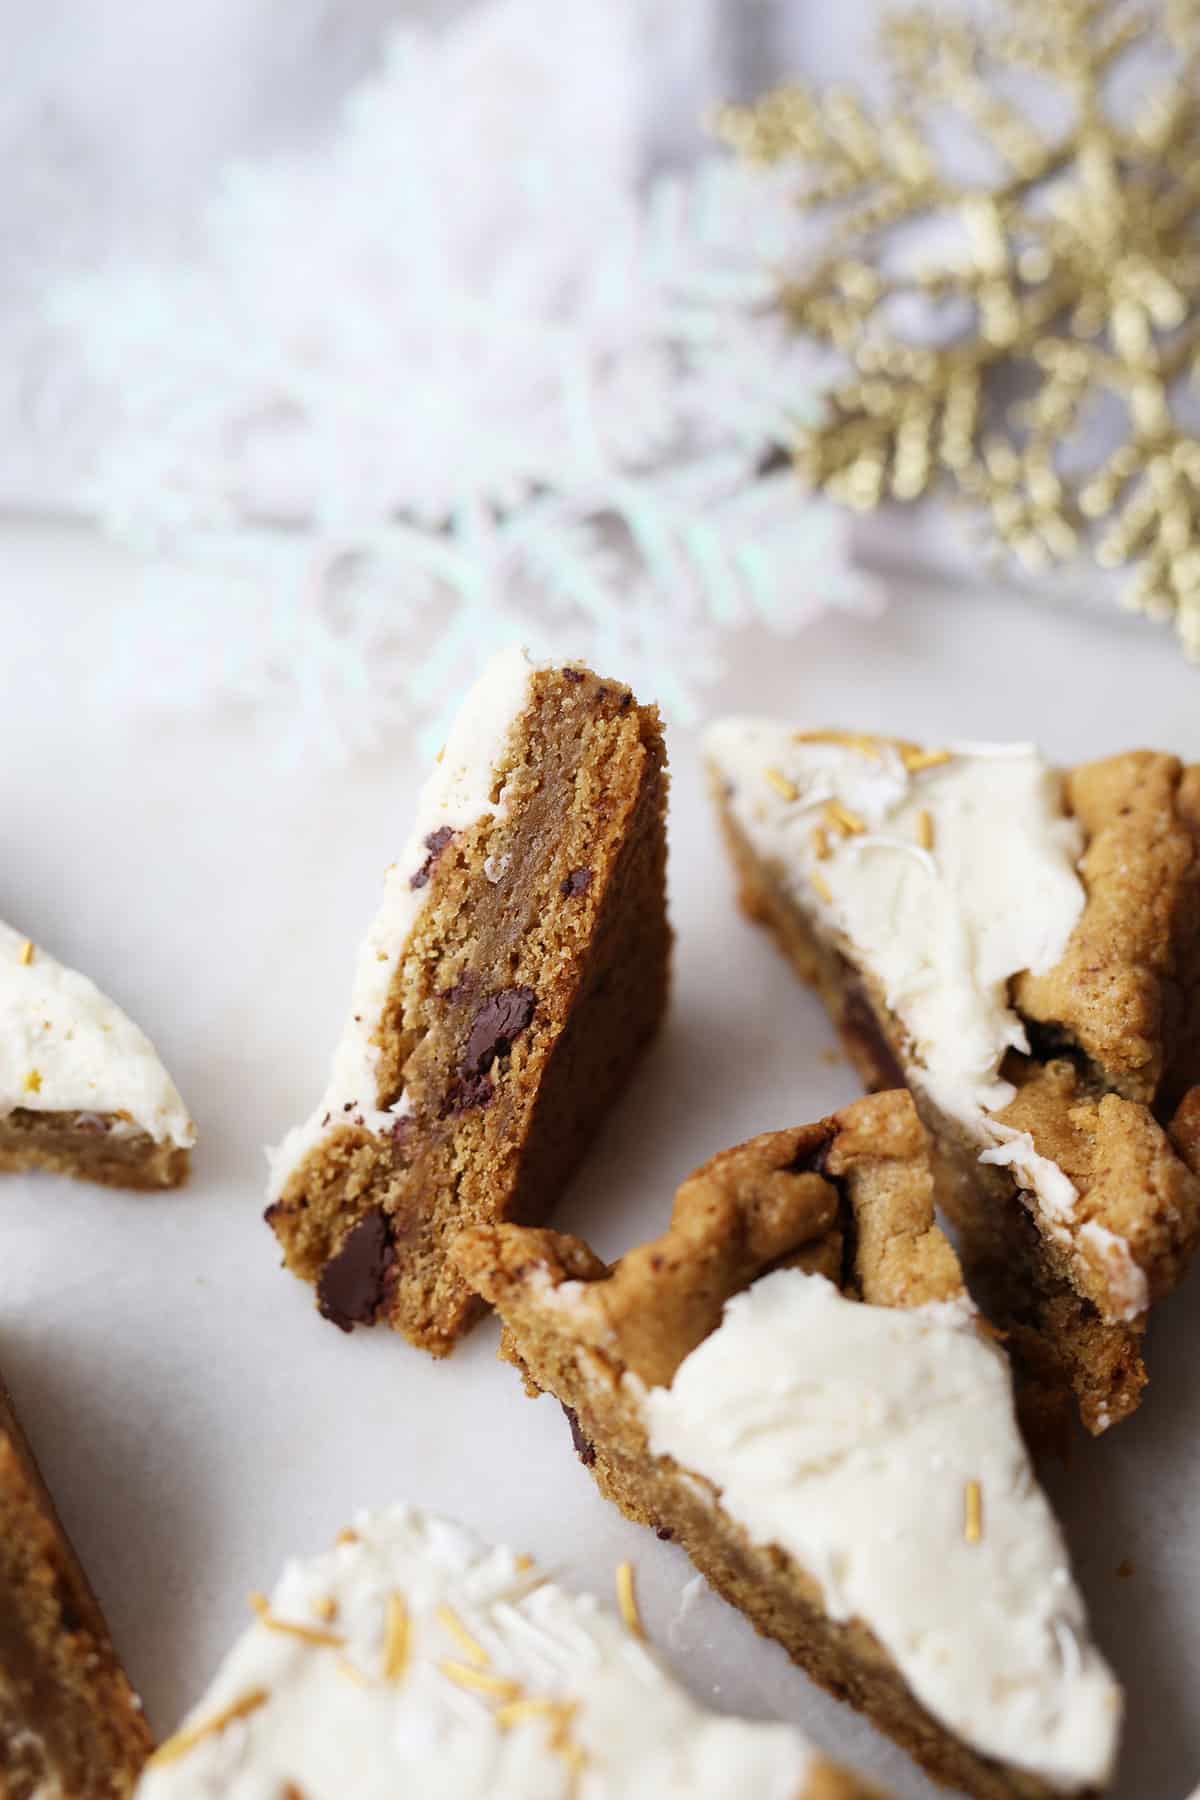 Santa’s Chocolate Chip Cookie Bars are a twist on the traditional classic chocolate chip cookie left out for Santa! They’re sweet, chewy, soft and vegan! 